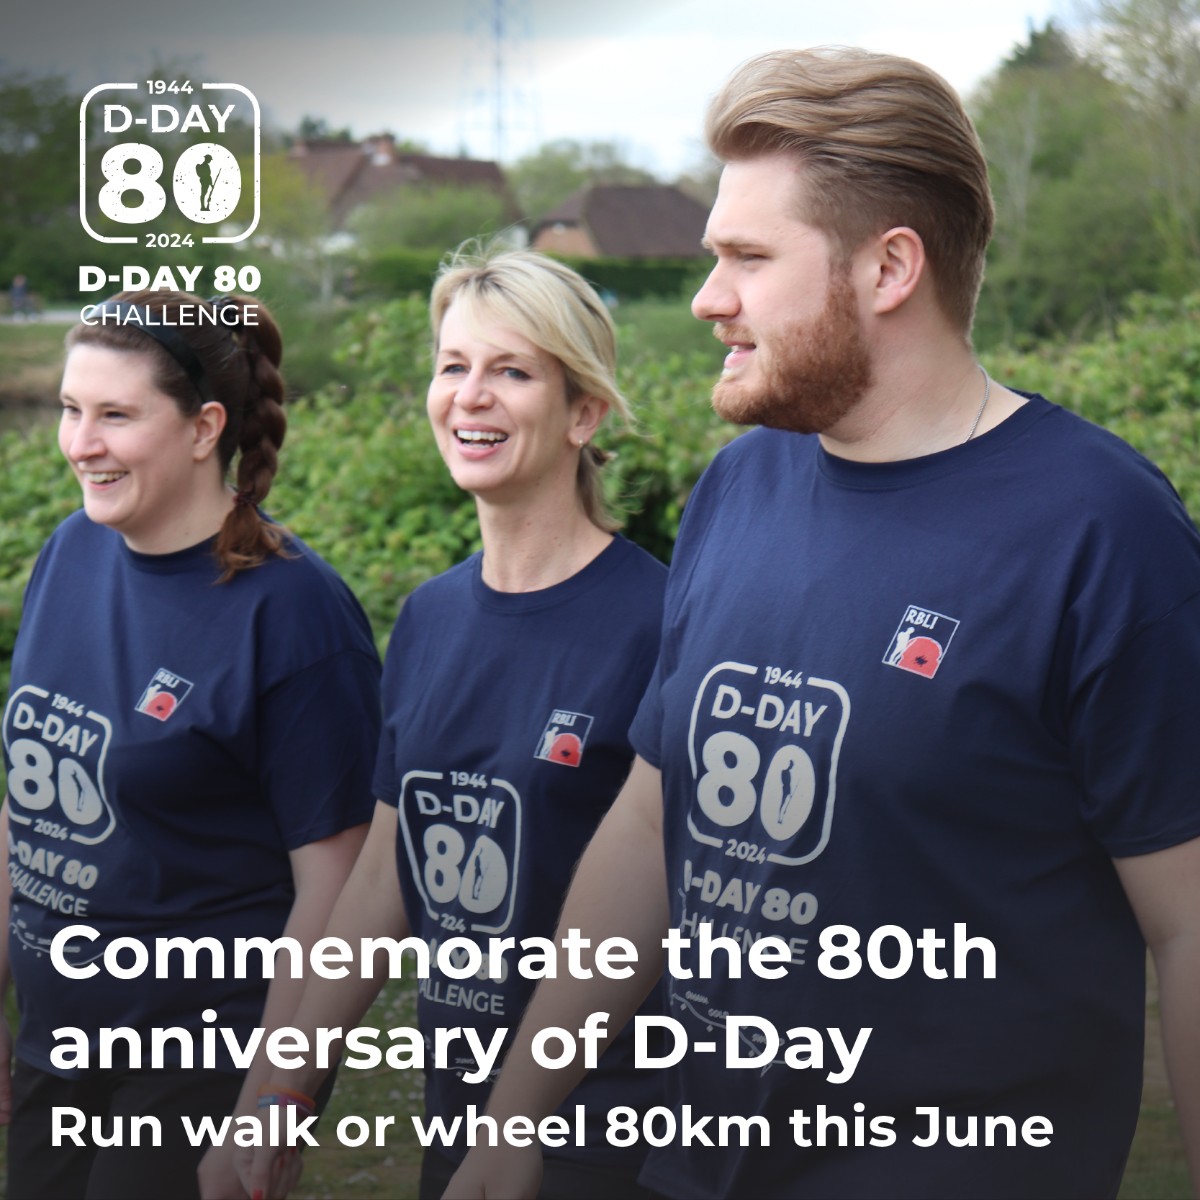 Join us for the D-Day 80 Challenge as we commemorate the 80th anniversary of the D-Day landings in 1944. 🎖️ Take on 80km, however you choose, throughout June by signing up here: brnw.ch/21wK8aF